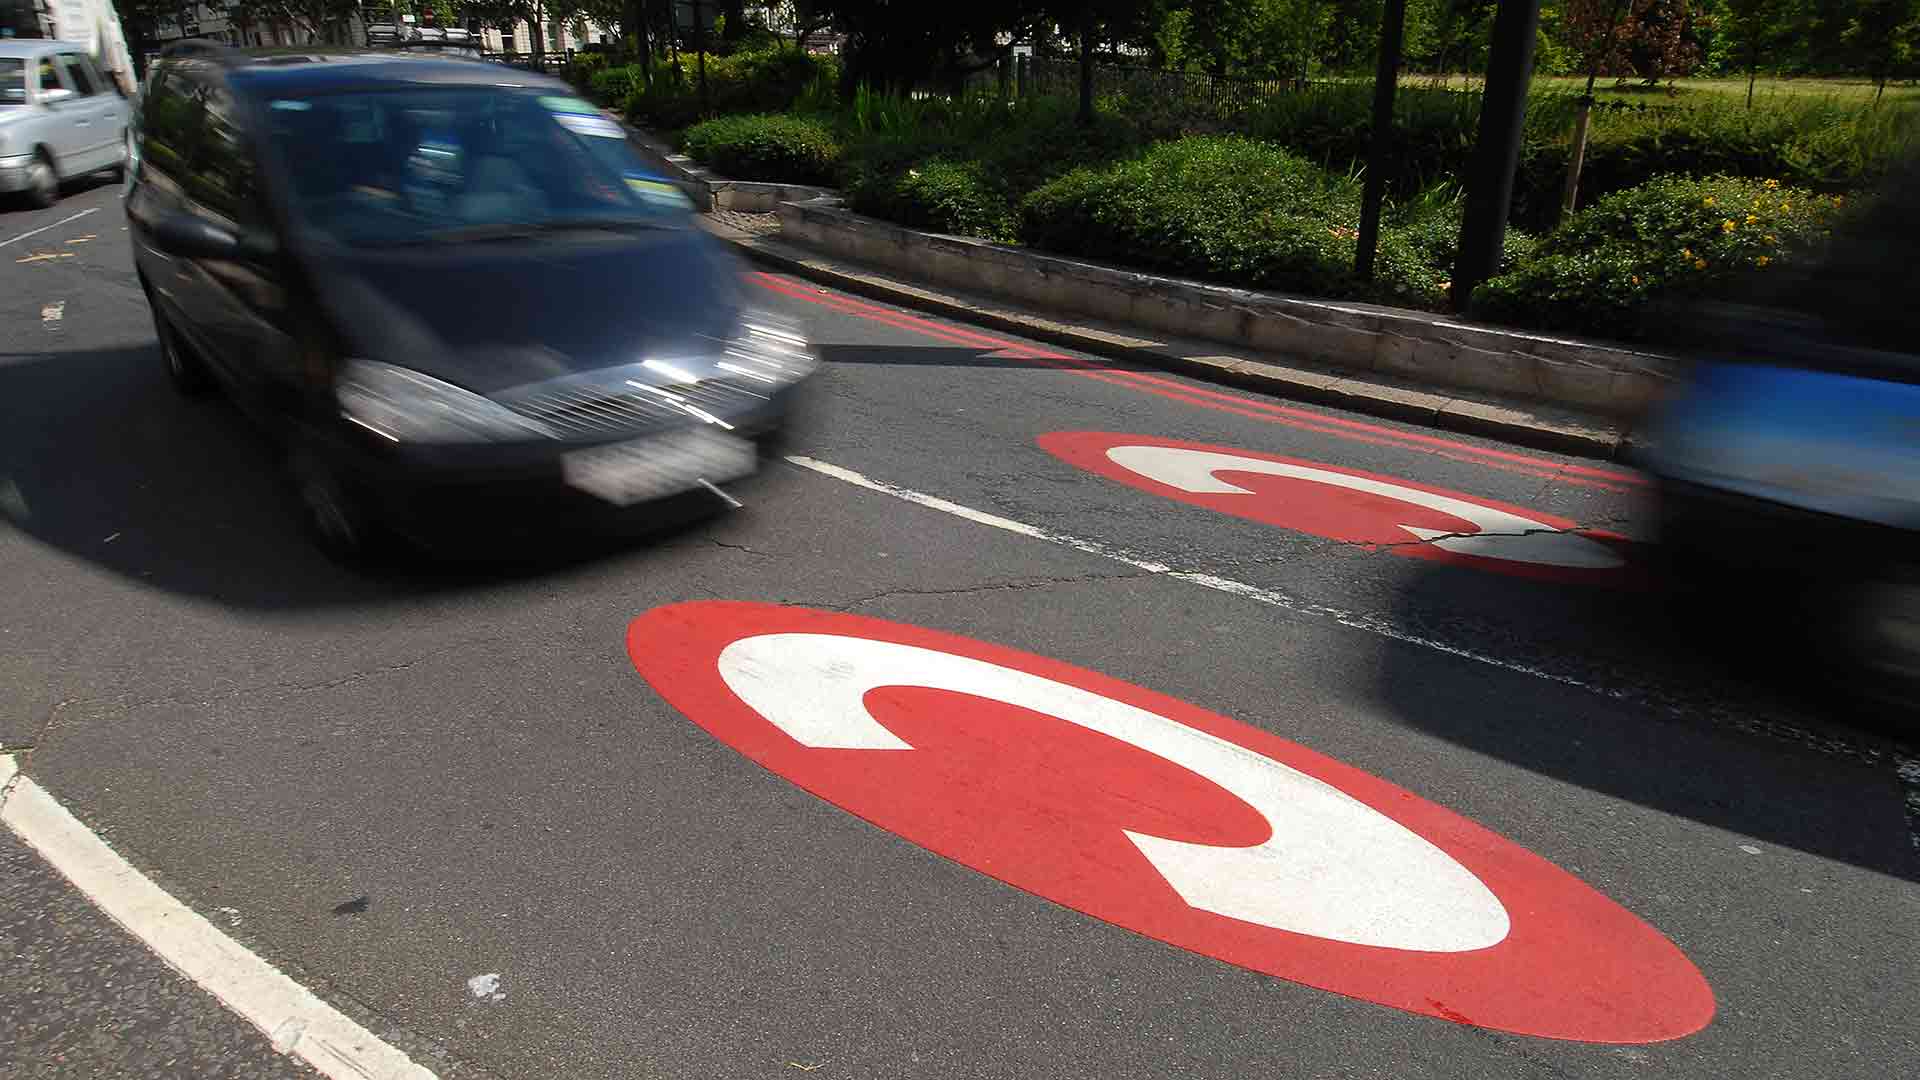 Transport for London Congestion Charge